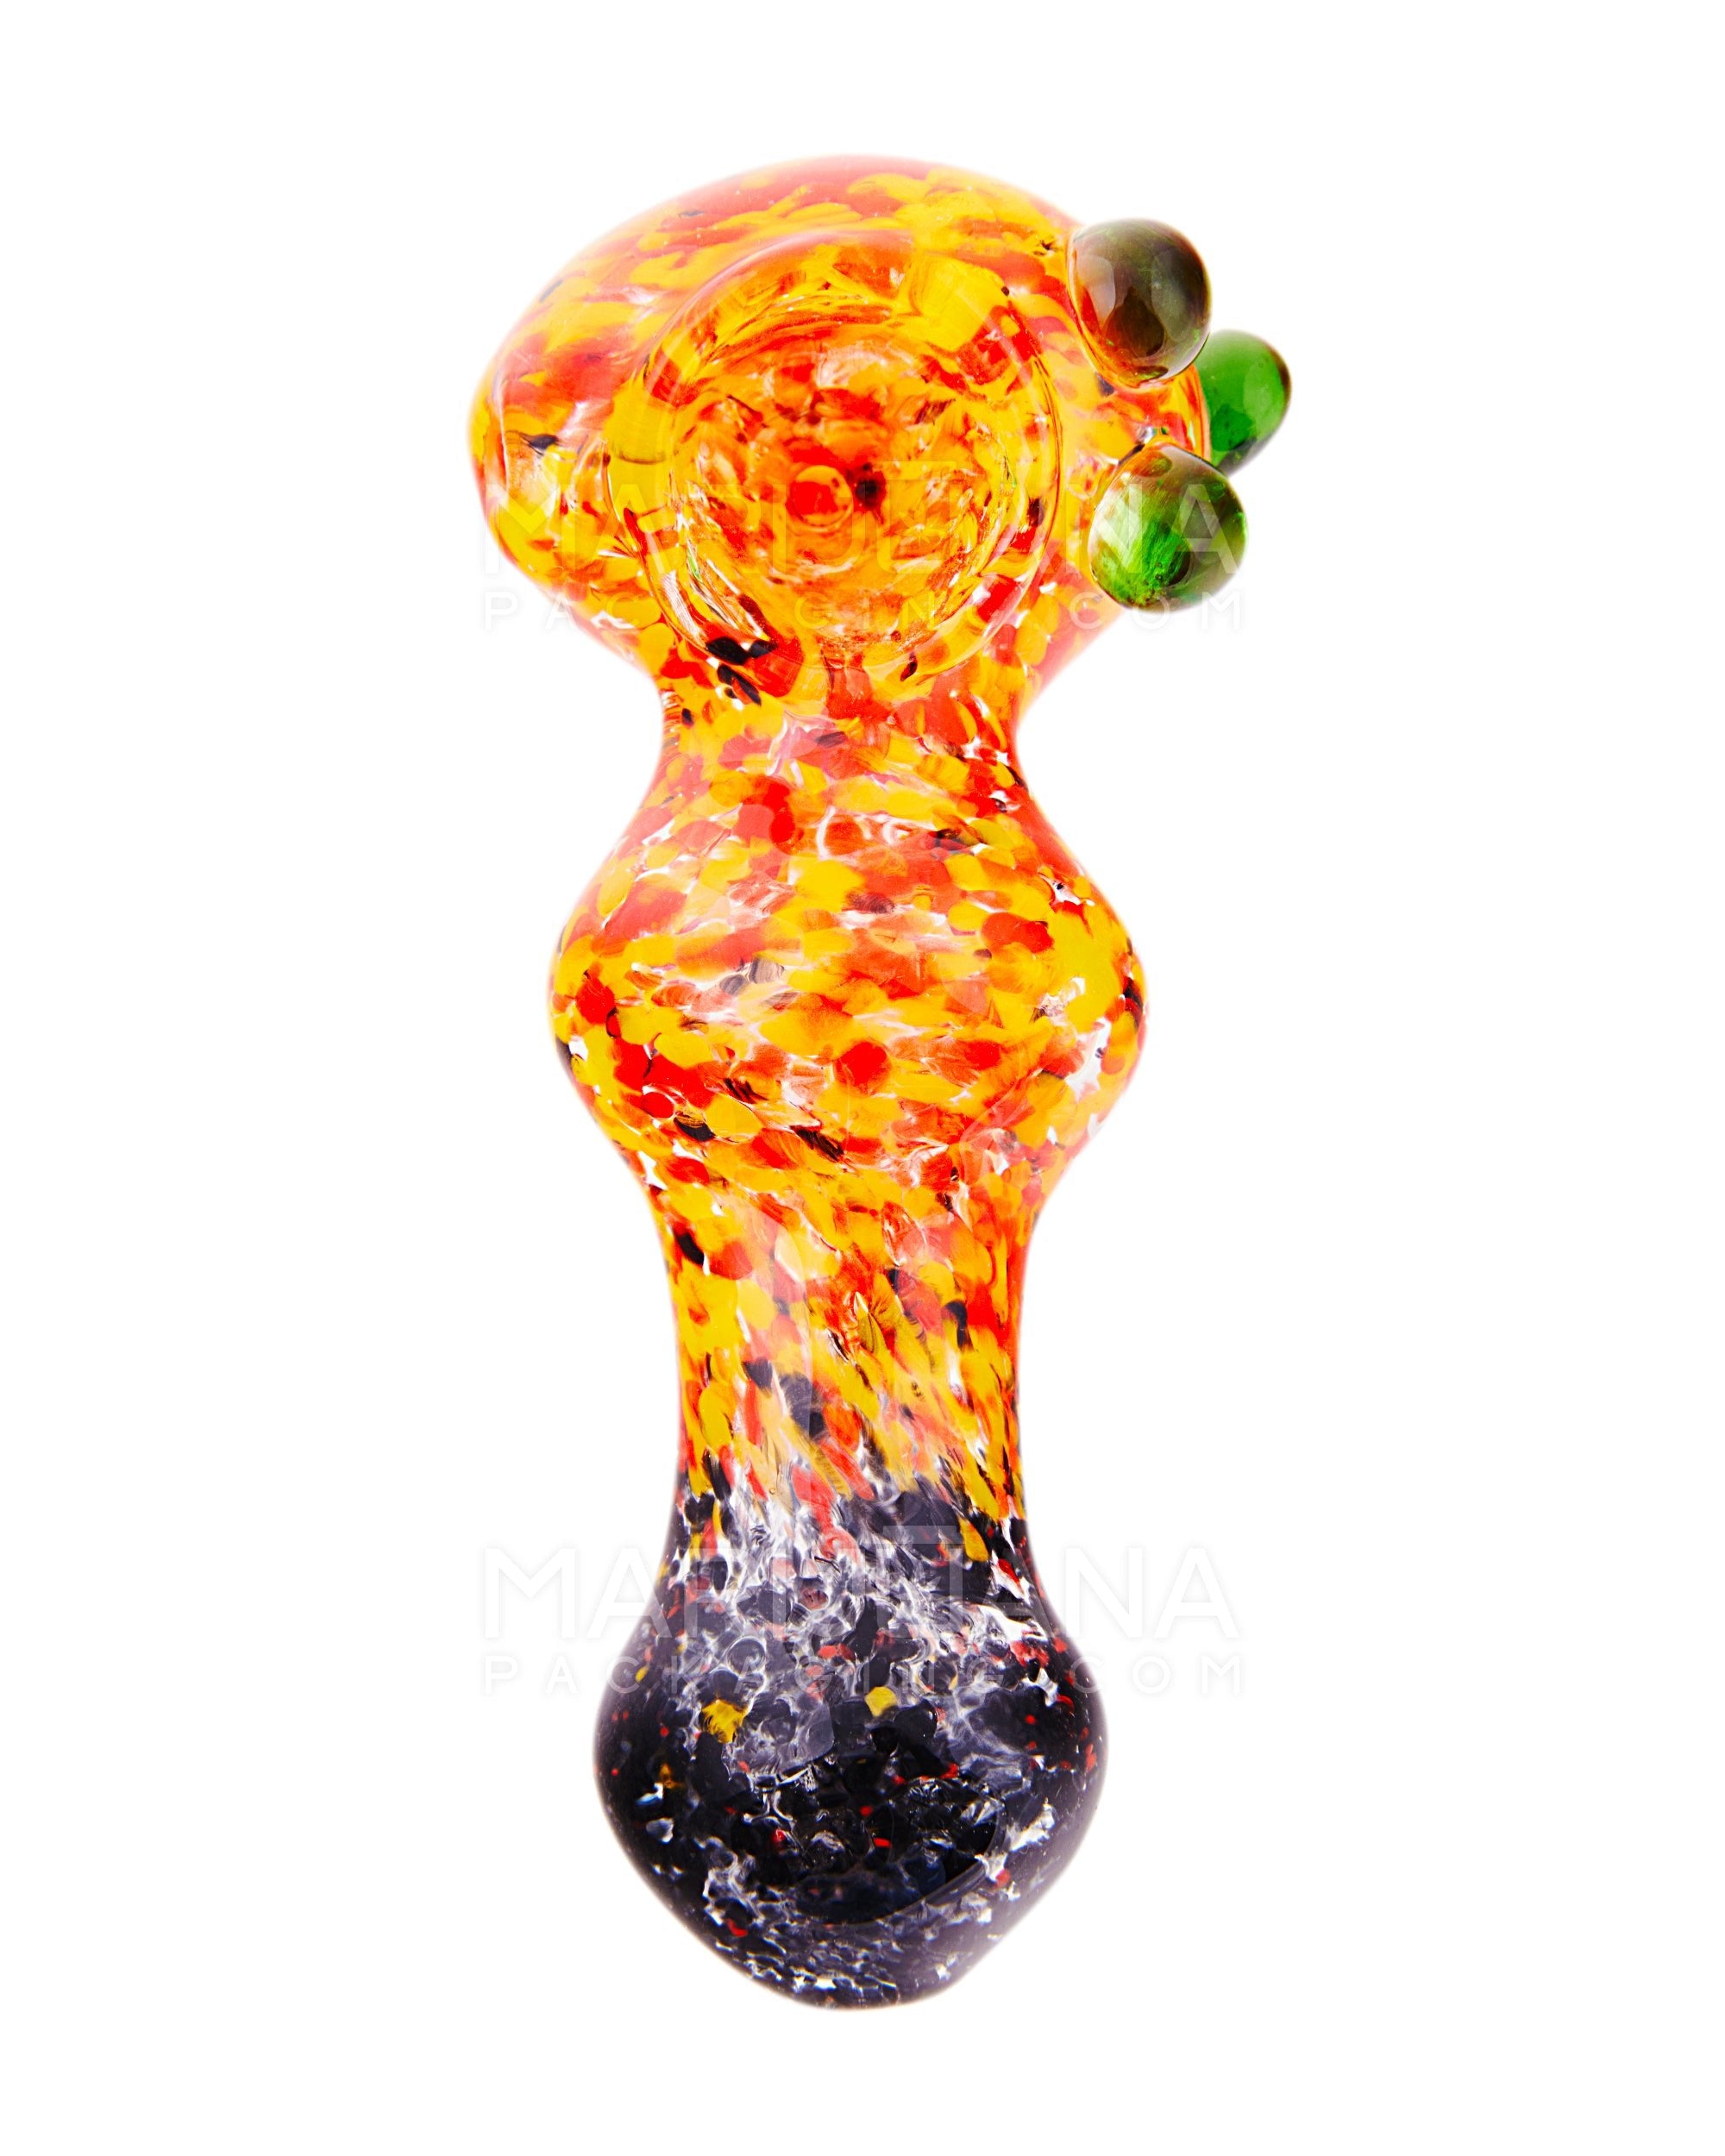 Splatter & Multi Frit Bulged Spoon Hand Pipe w/ Double Knockers | 5in Long - Glass - Assorted - 2